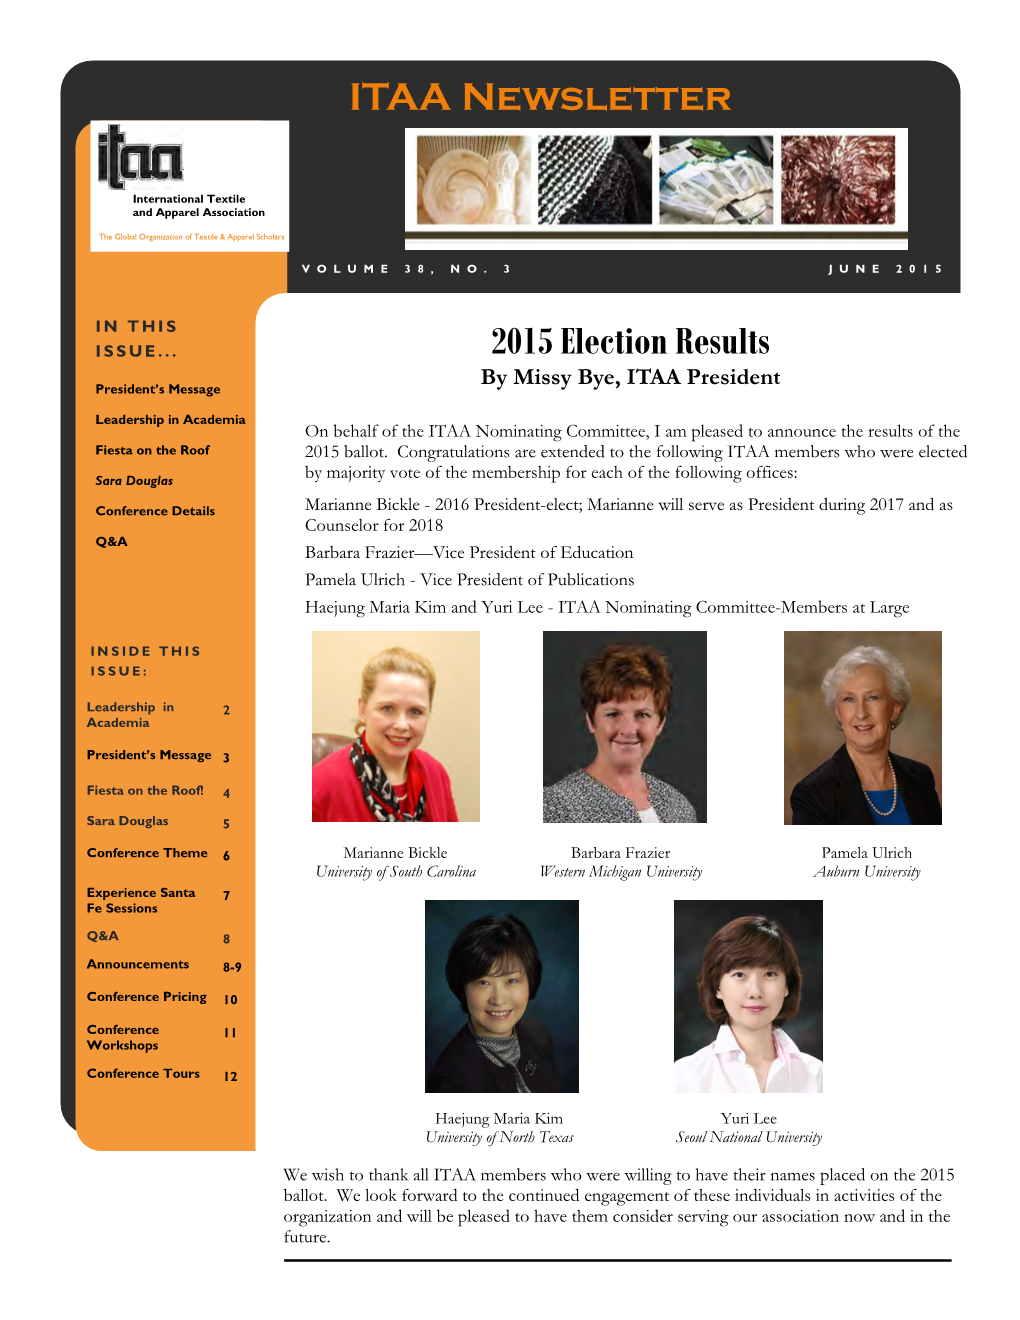 ITAA Newsletter 2015 Election Results